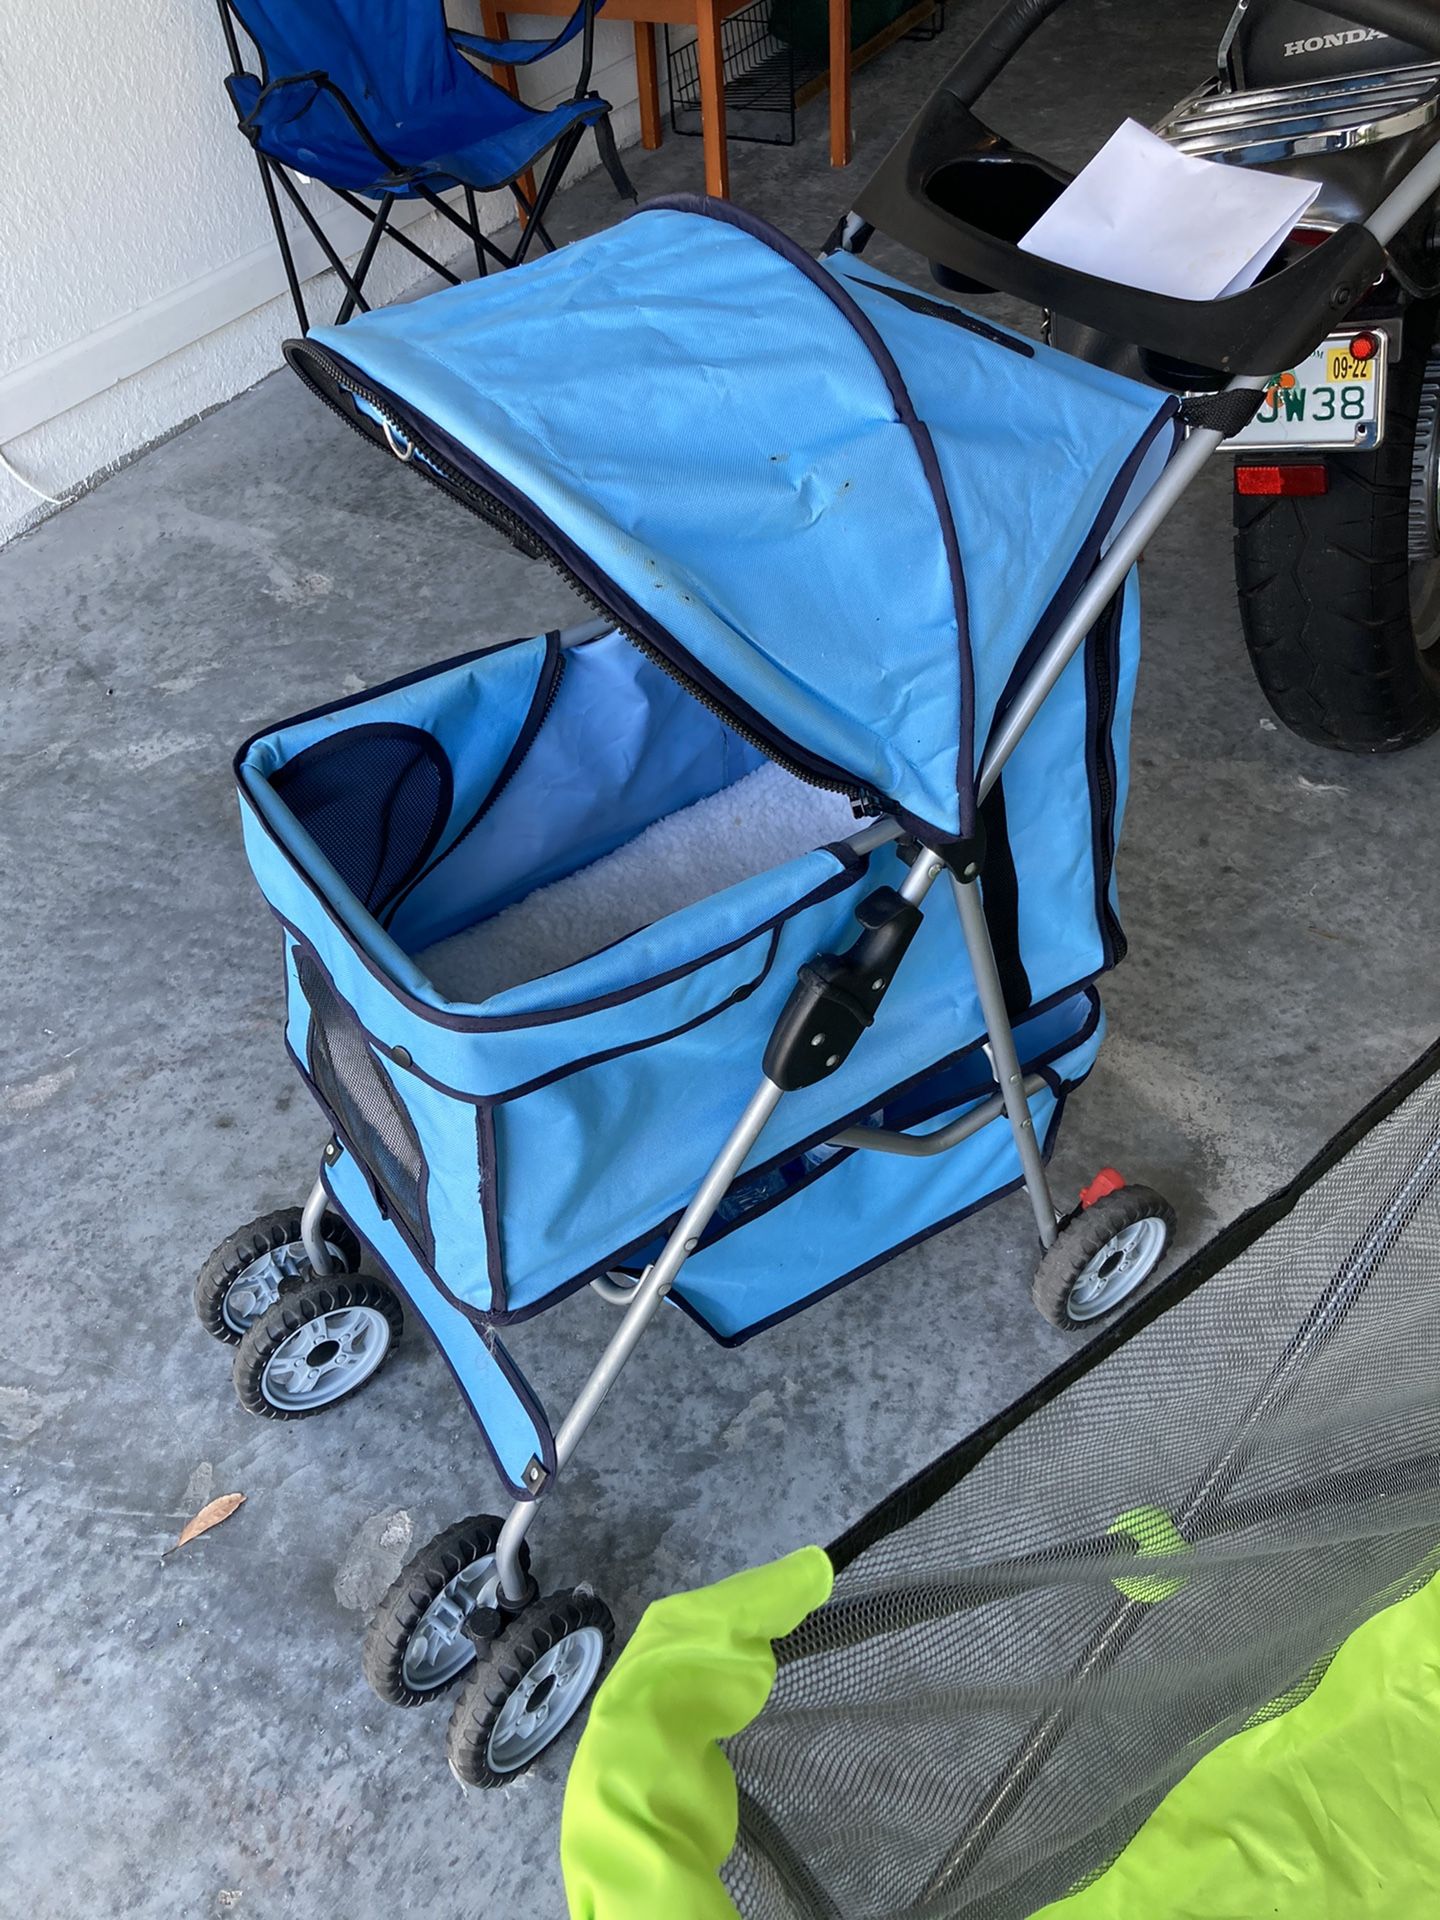 I Am Selling The Dog Strollers An Play Pin For Dog